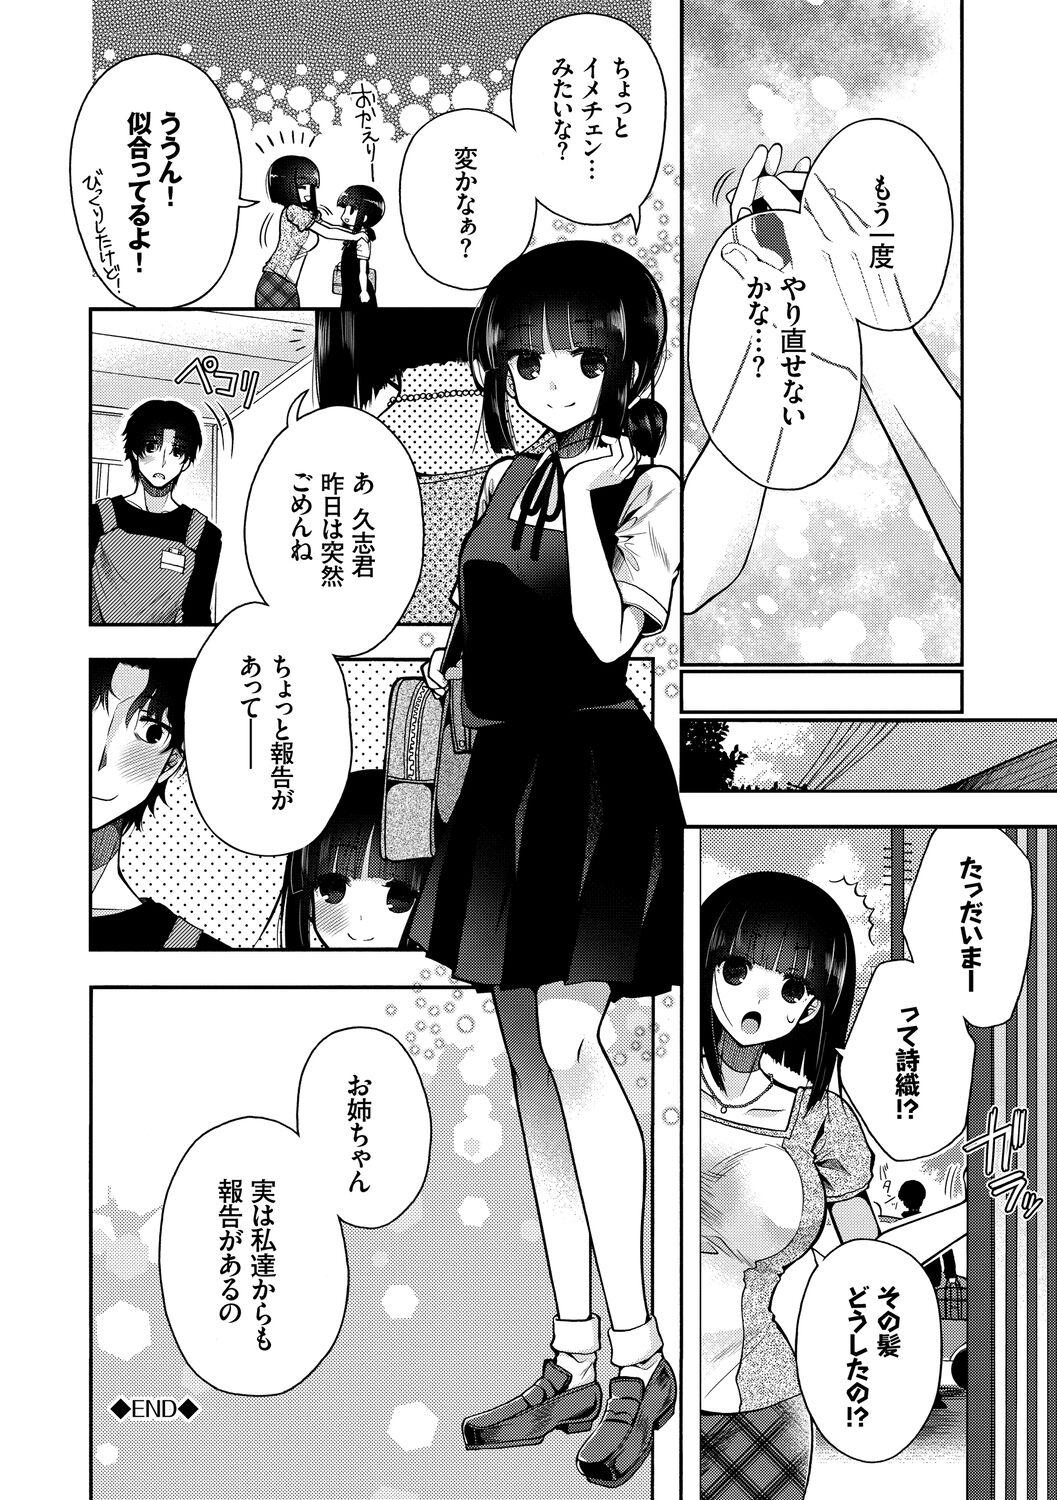 Hatsukoi Melty - Melty First Love 113